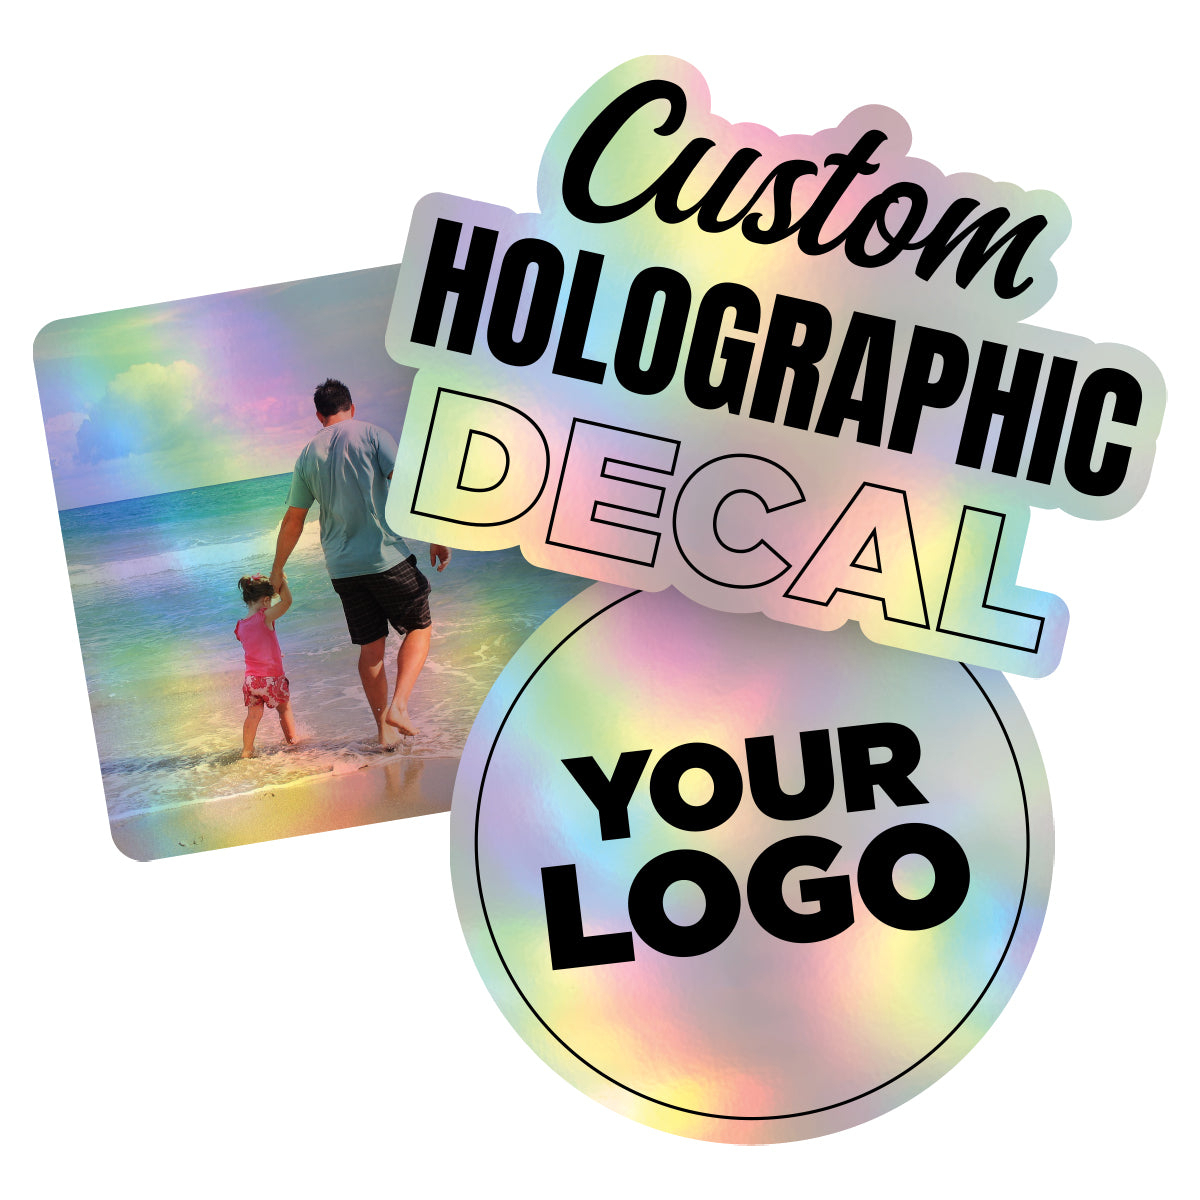 Personalized Holographic Vinyl Sticker Decal Custom Made Any Logo, Image, Text, Or Name Die Cut To Shape - 25 Pack, 4 Inch, Die Cut